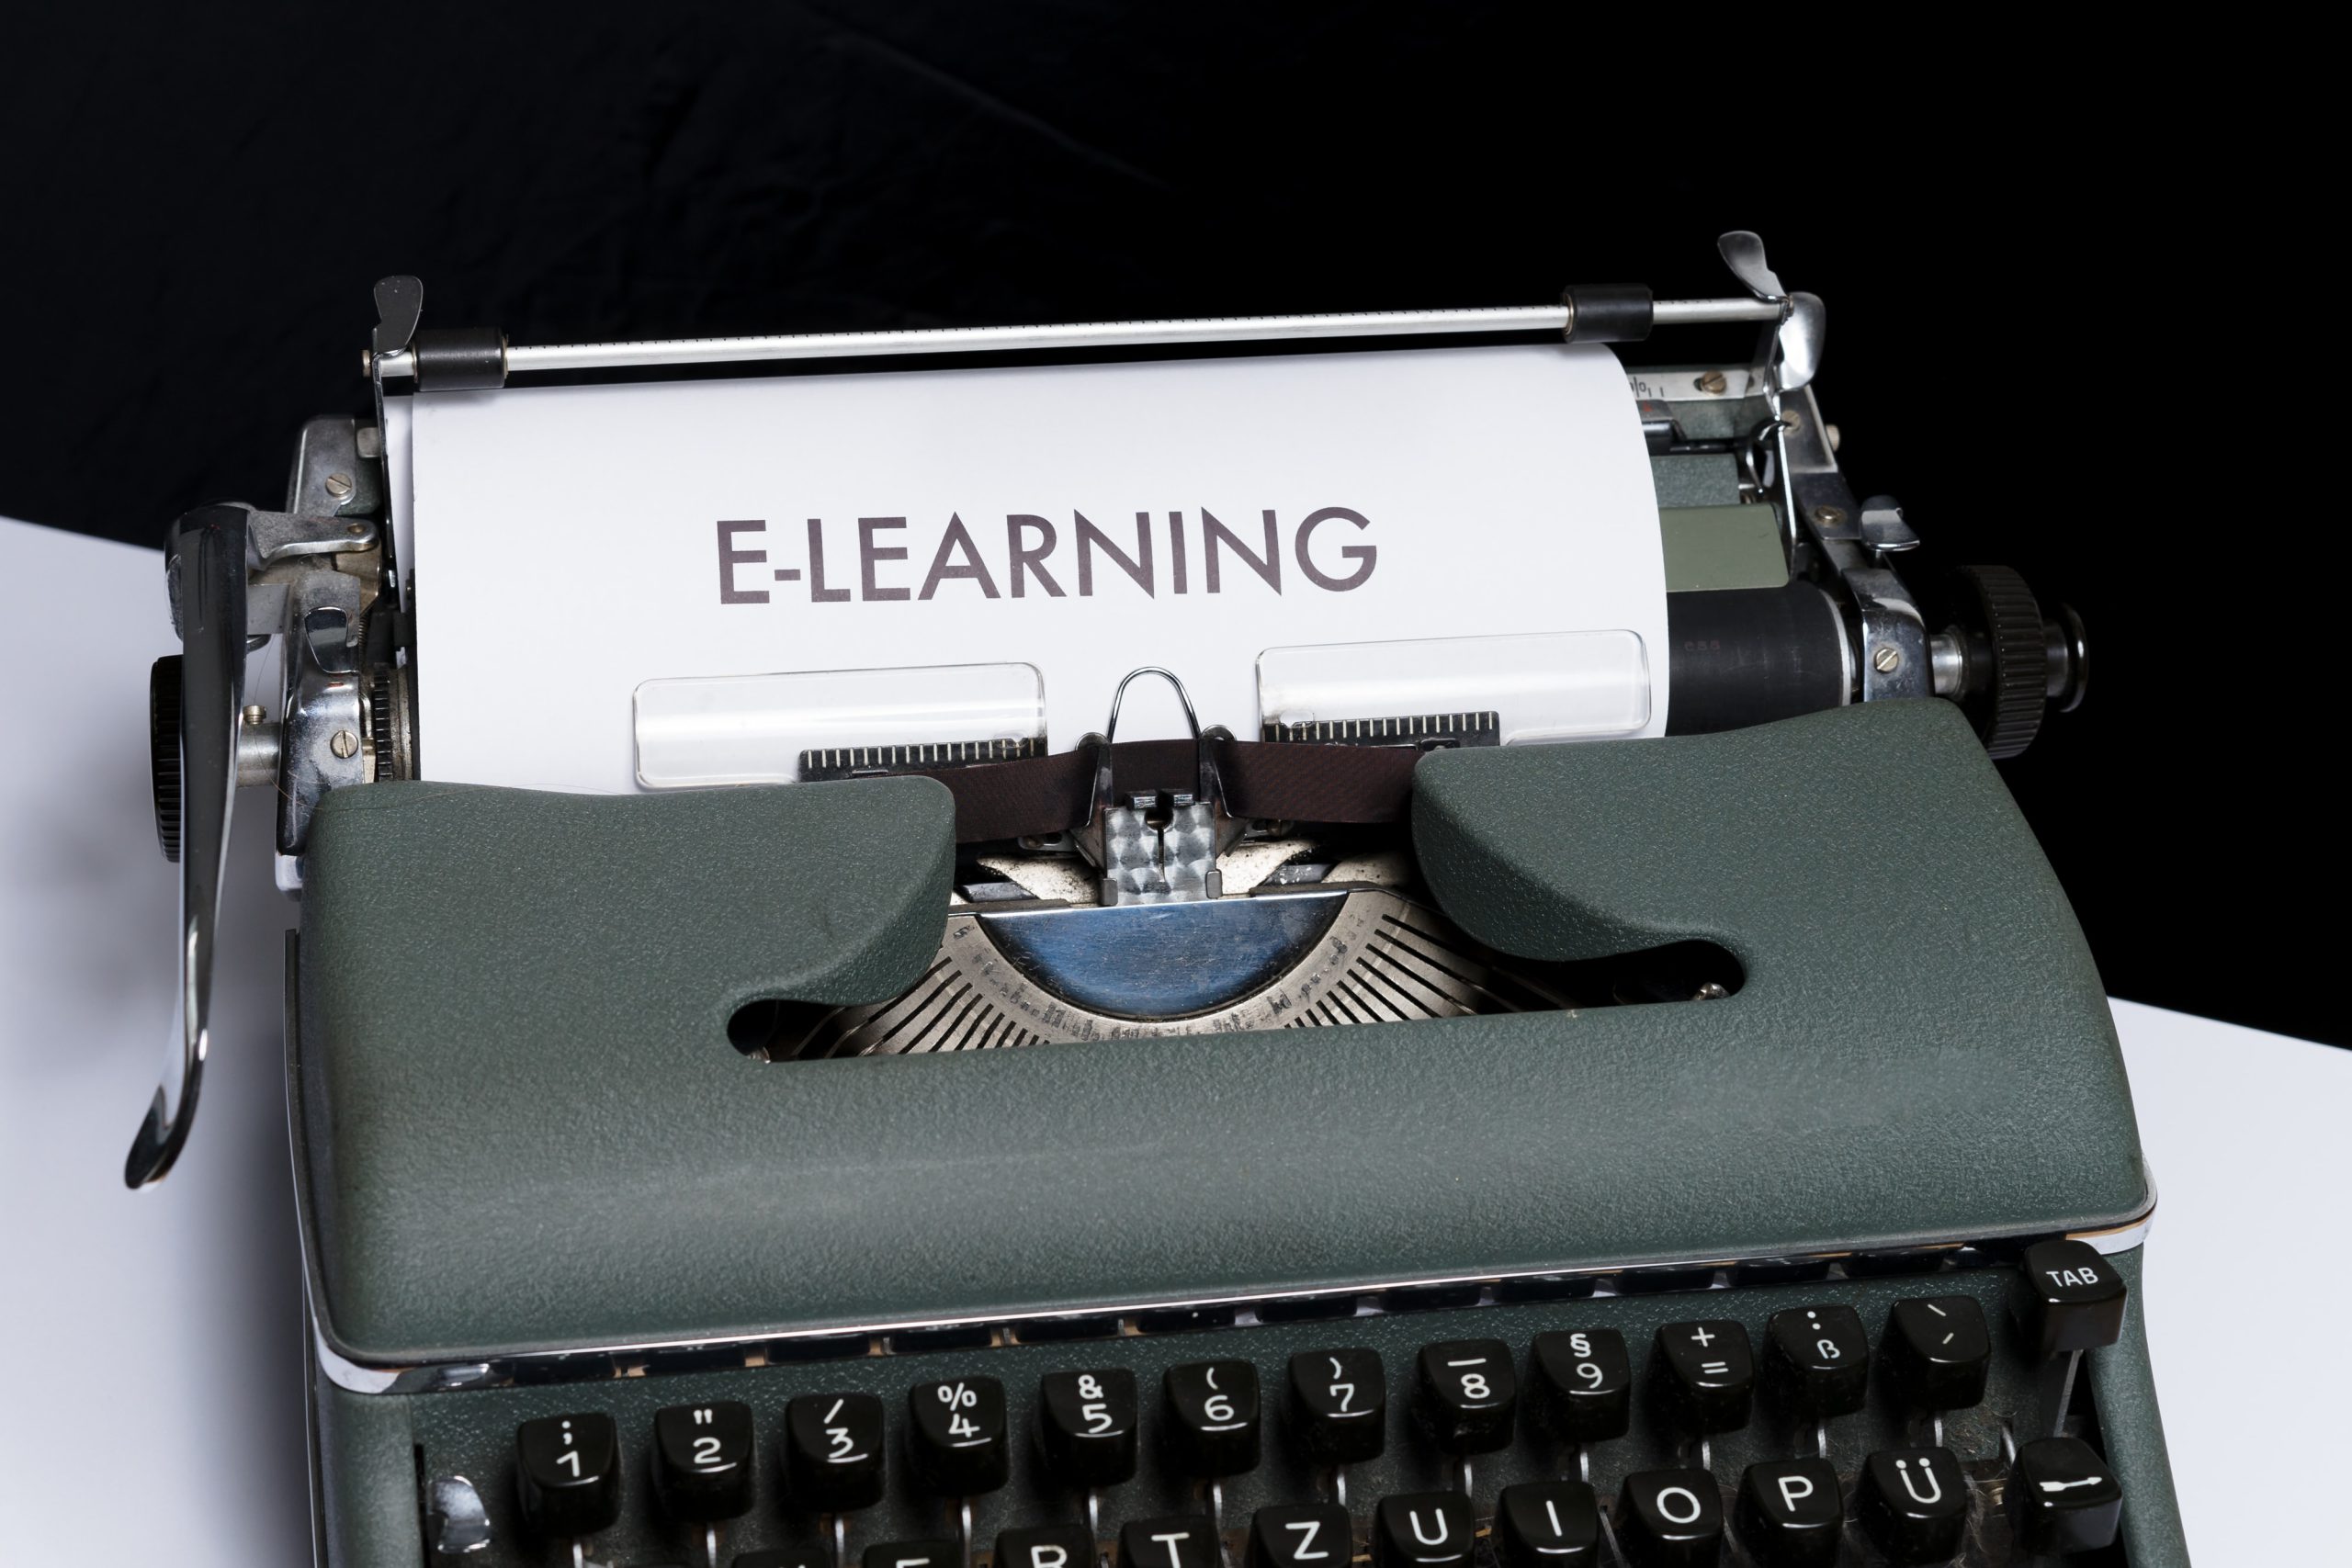 typewriter with the words "E-Learing" printed on paper